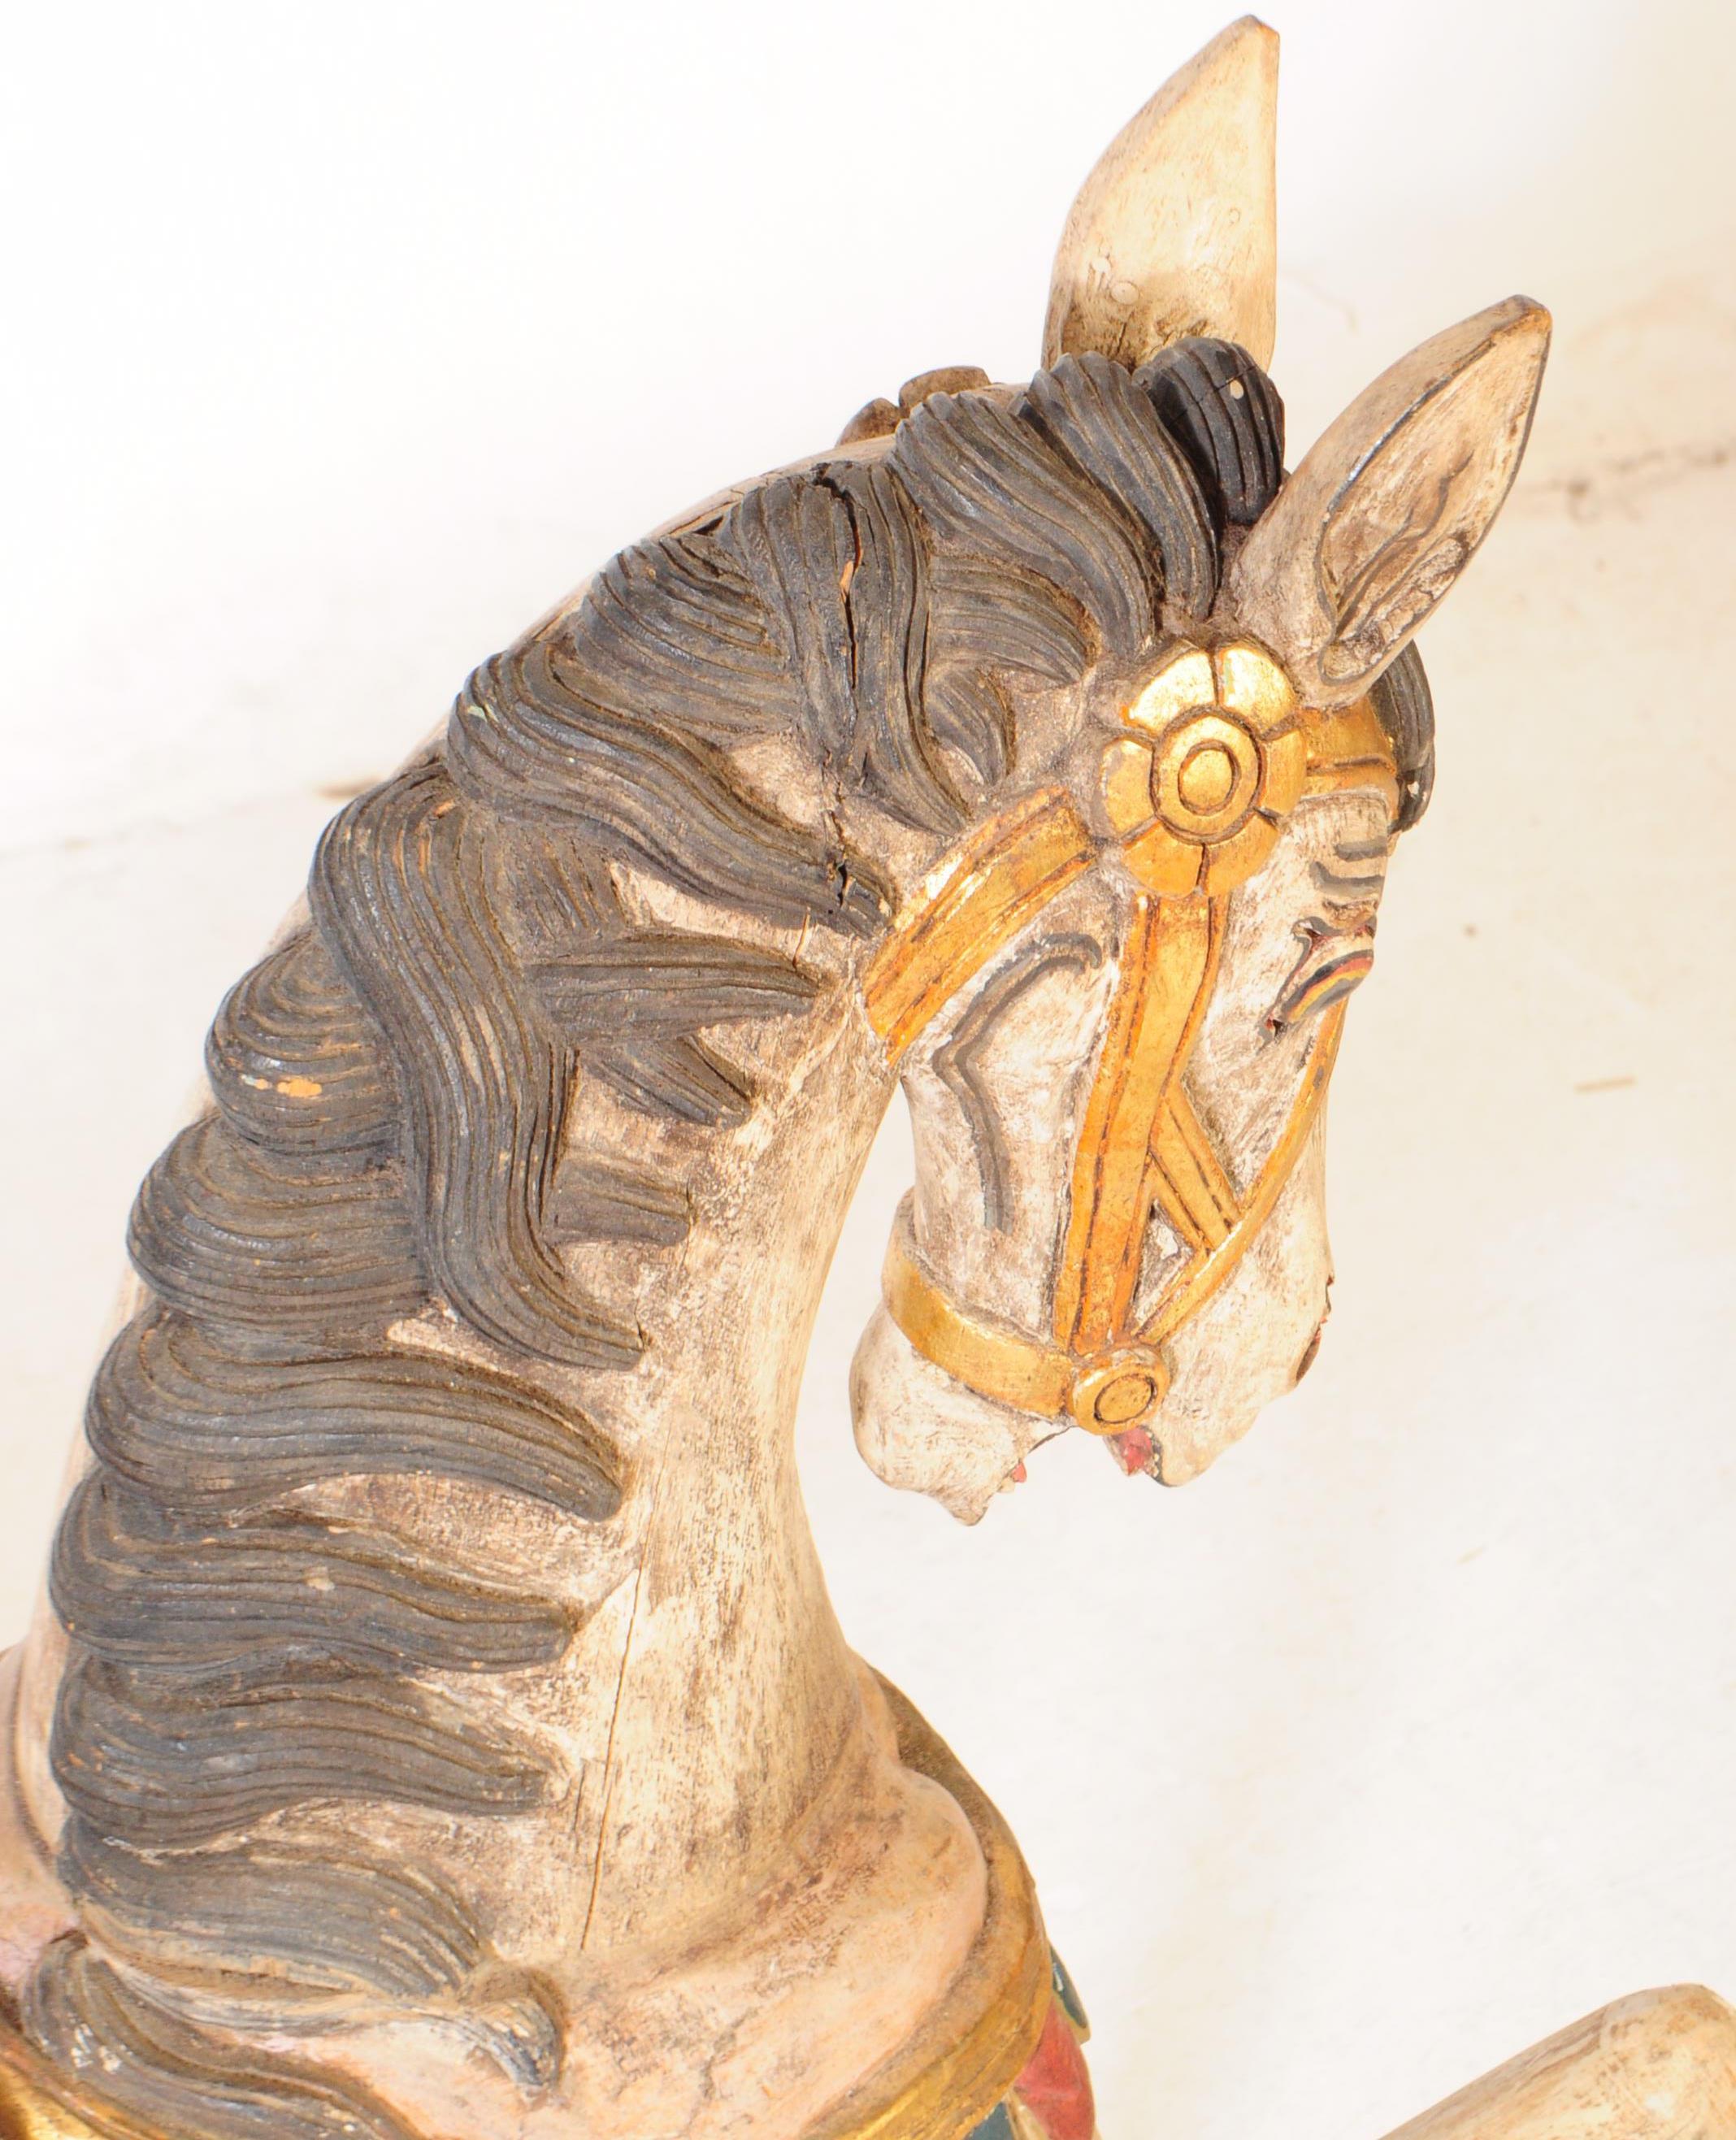 MID 20TH CENTURY EUROPEAN CAROUSEL HAND CARVED HORSE - Image 5 of 6